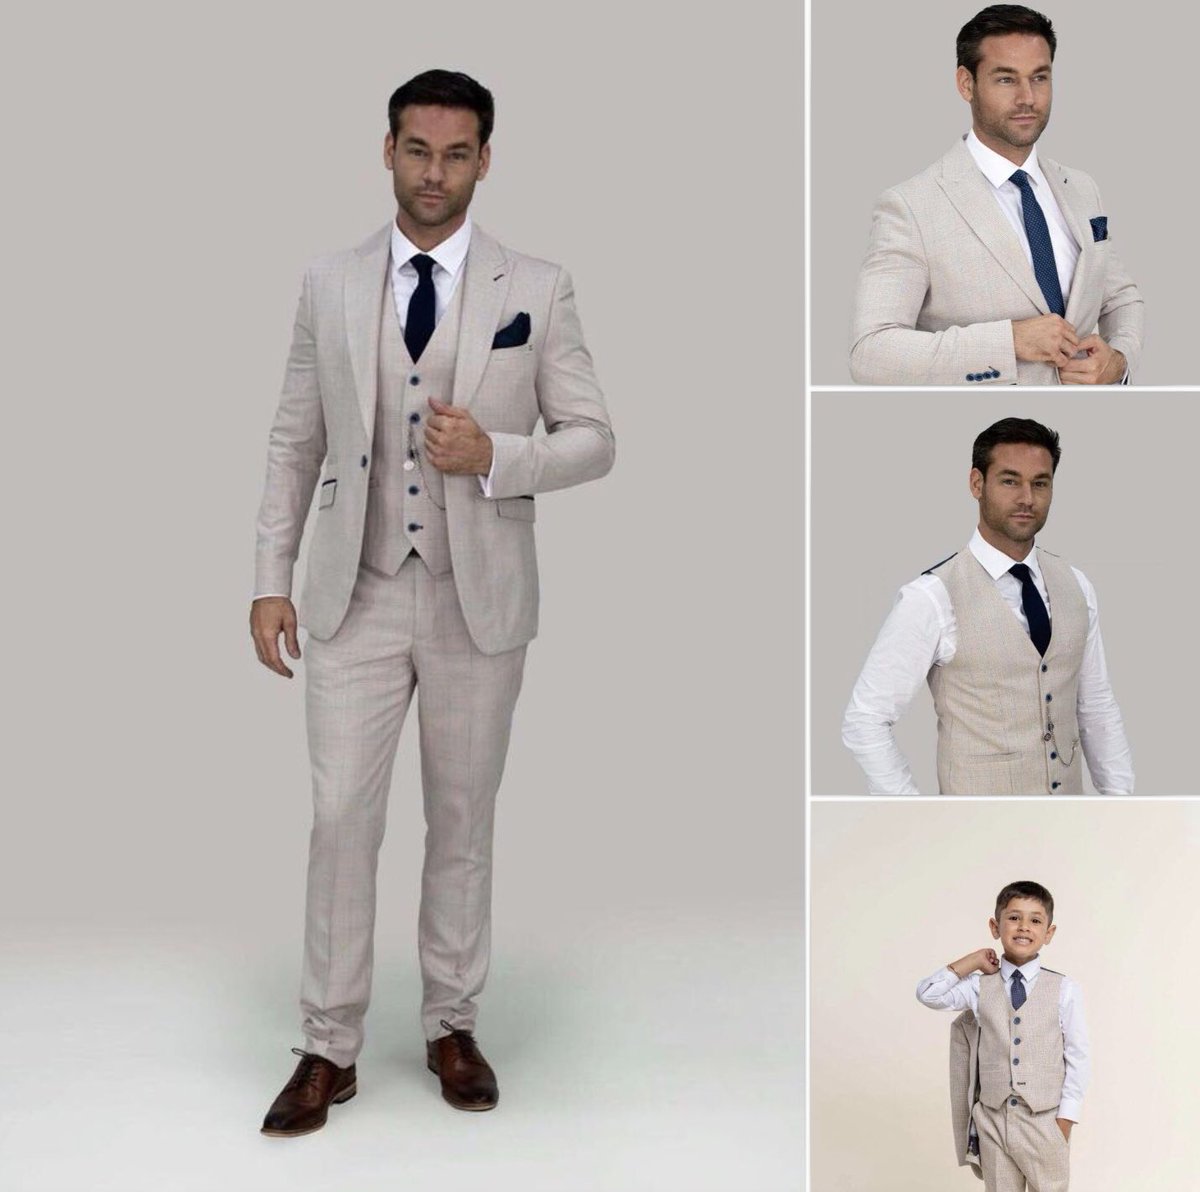 Perfect for formal occasions and weddings for a summer look - also available in Sky Blue, Brown and Navy and in matching boys sizes too!

#worcestershire #menssuits #weddingsuits #boyssuits